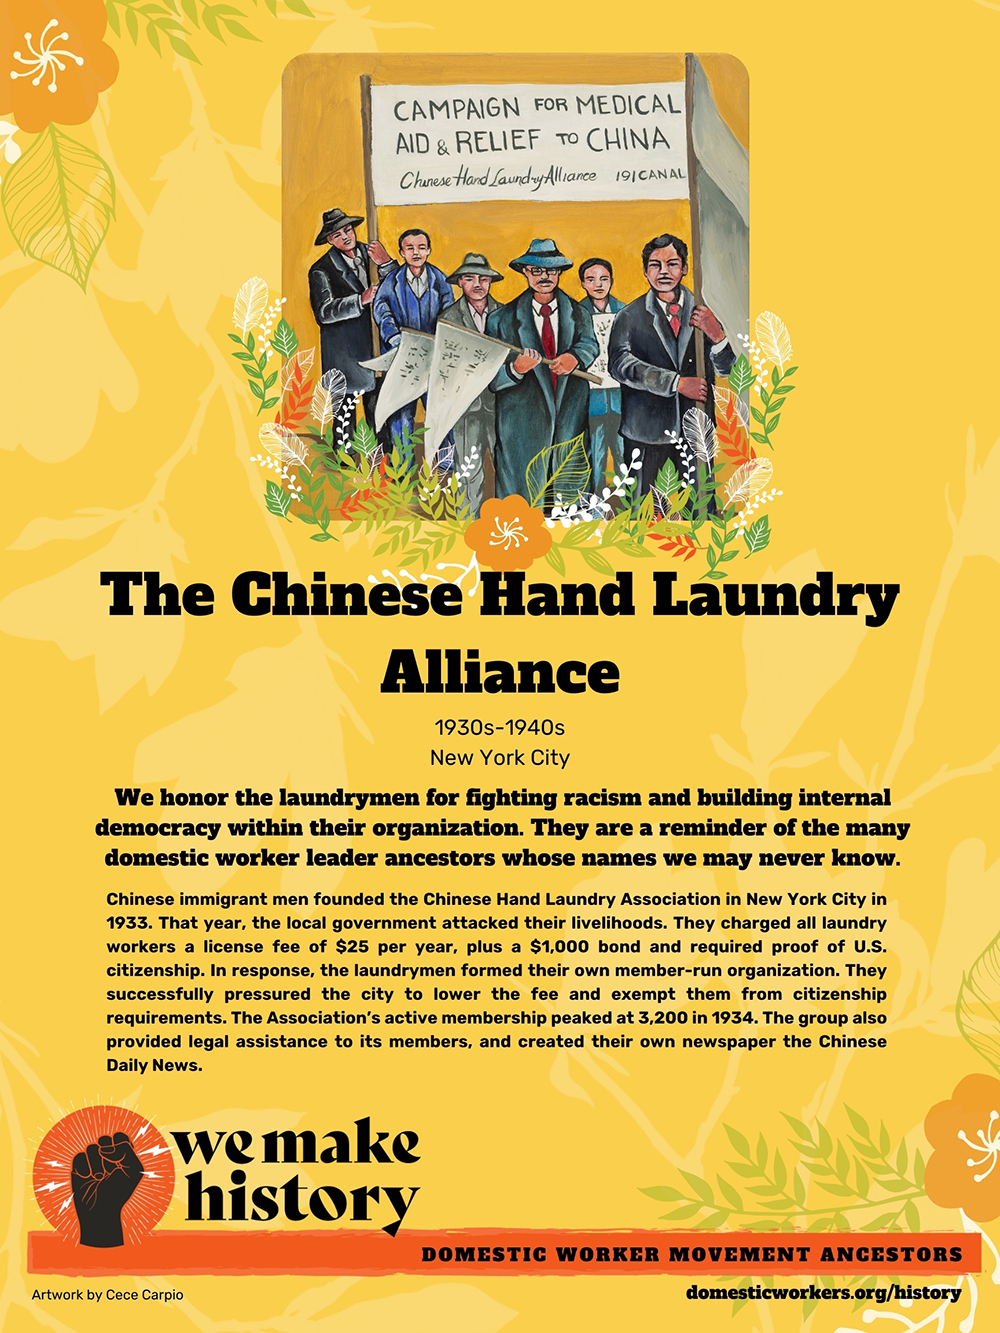 Domestic Worker Ancestors: The Chinese Hand Laundry Alliance